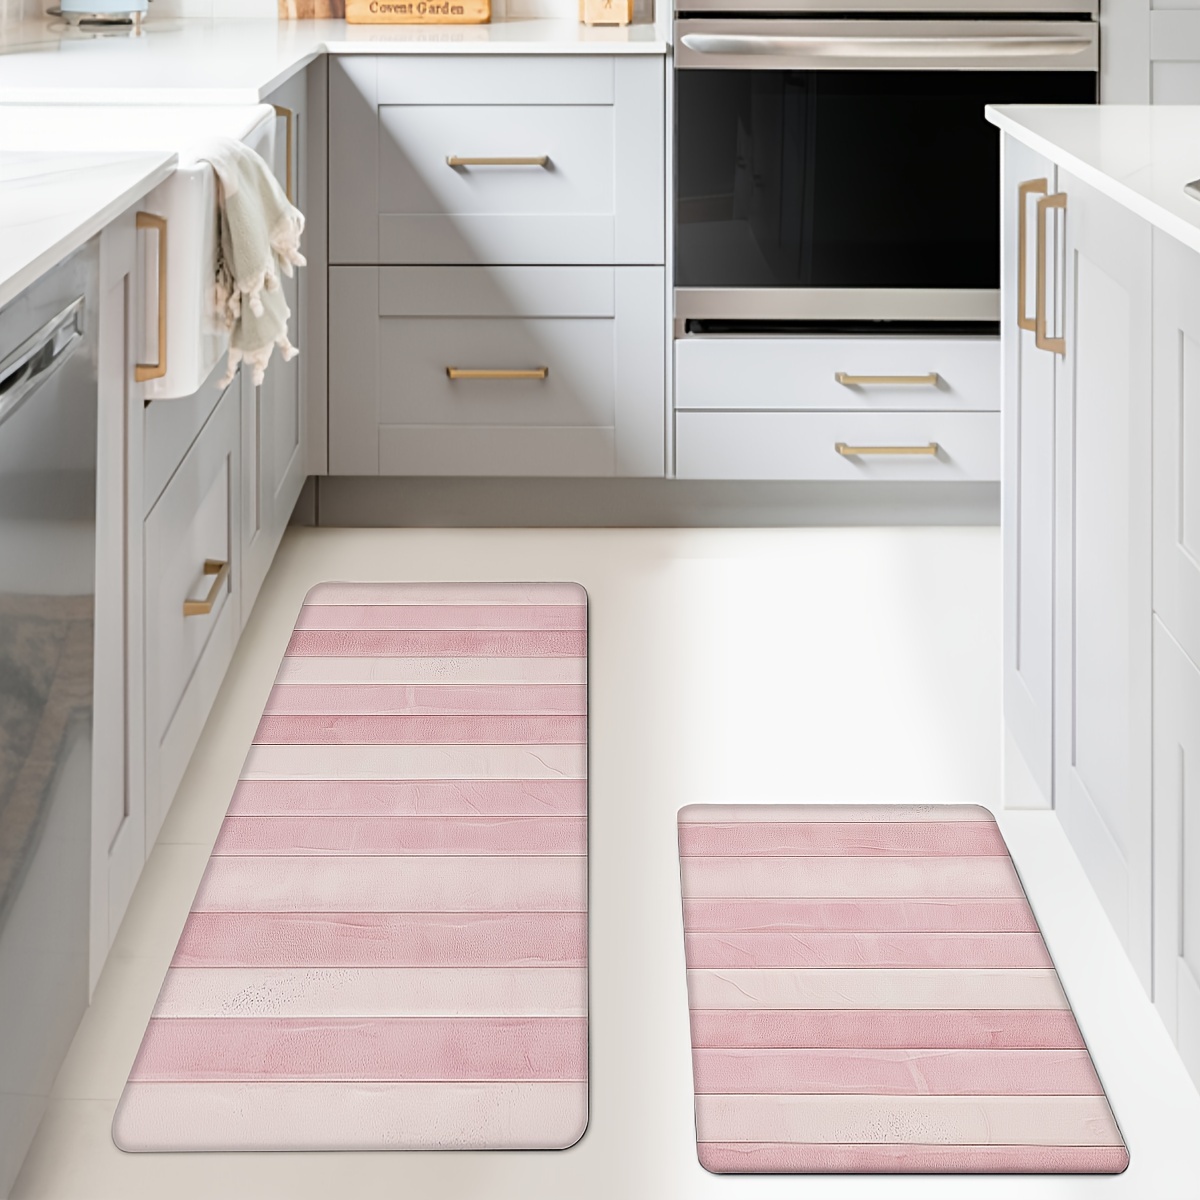 

1pc/2pcs, Pink Pattern Kitchen Mats, Non-slip And Durable Bathroom Pads For Floor, Comfortable Standing Runner Rugs, Carpets For Kitchen, Home, Office, Laundry Room, Bathroom, Spring Decor